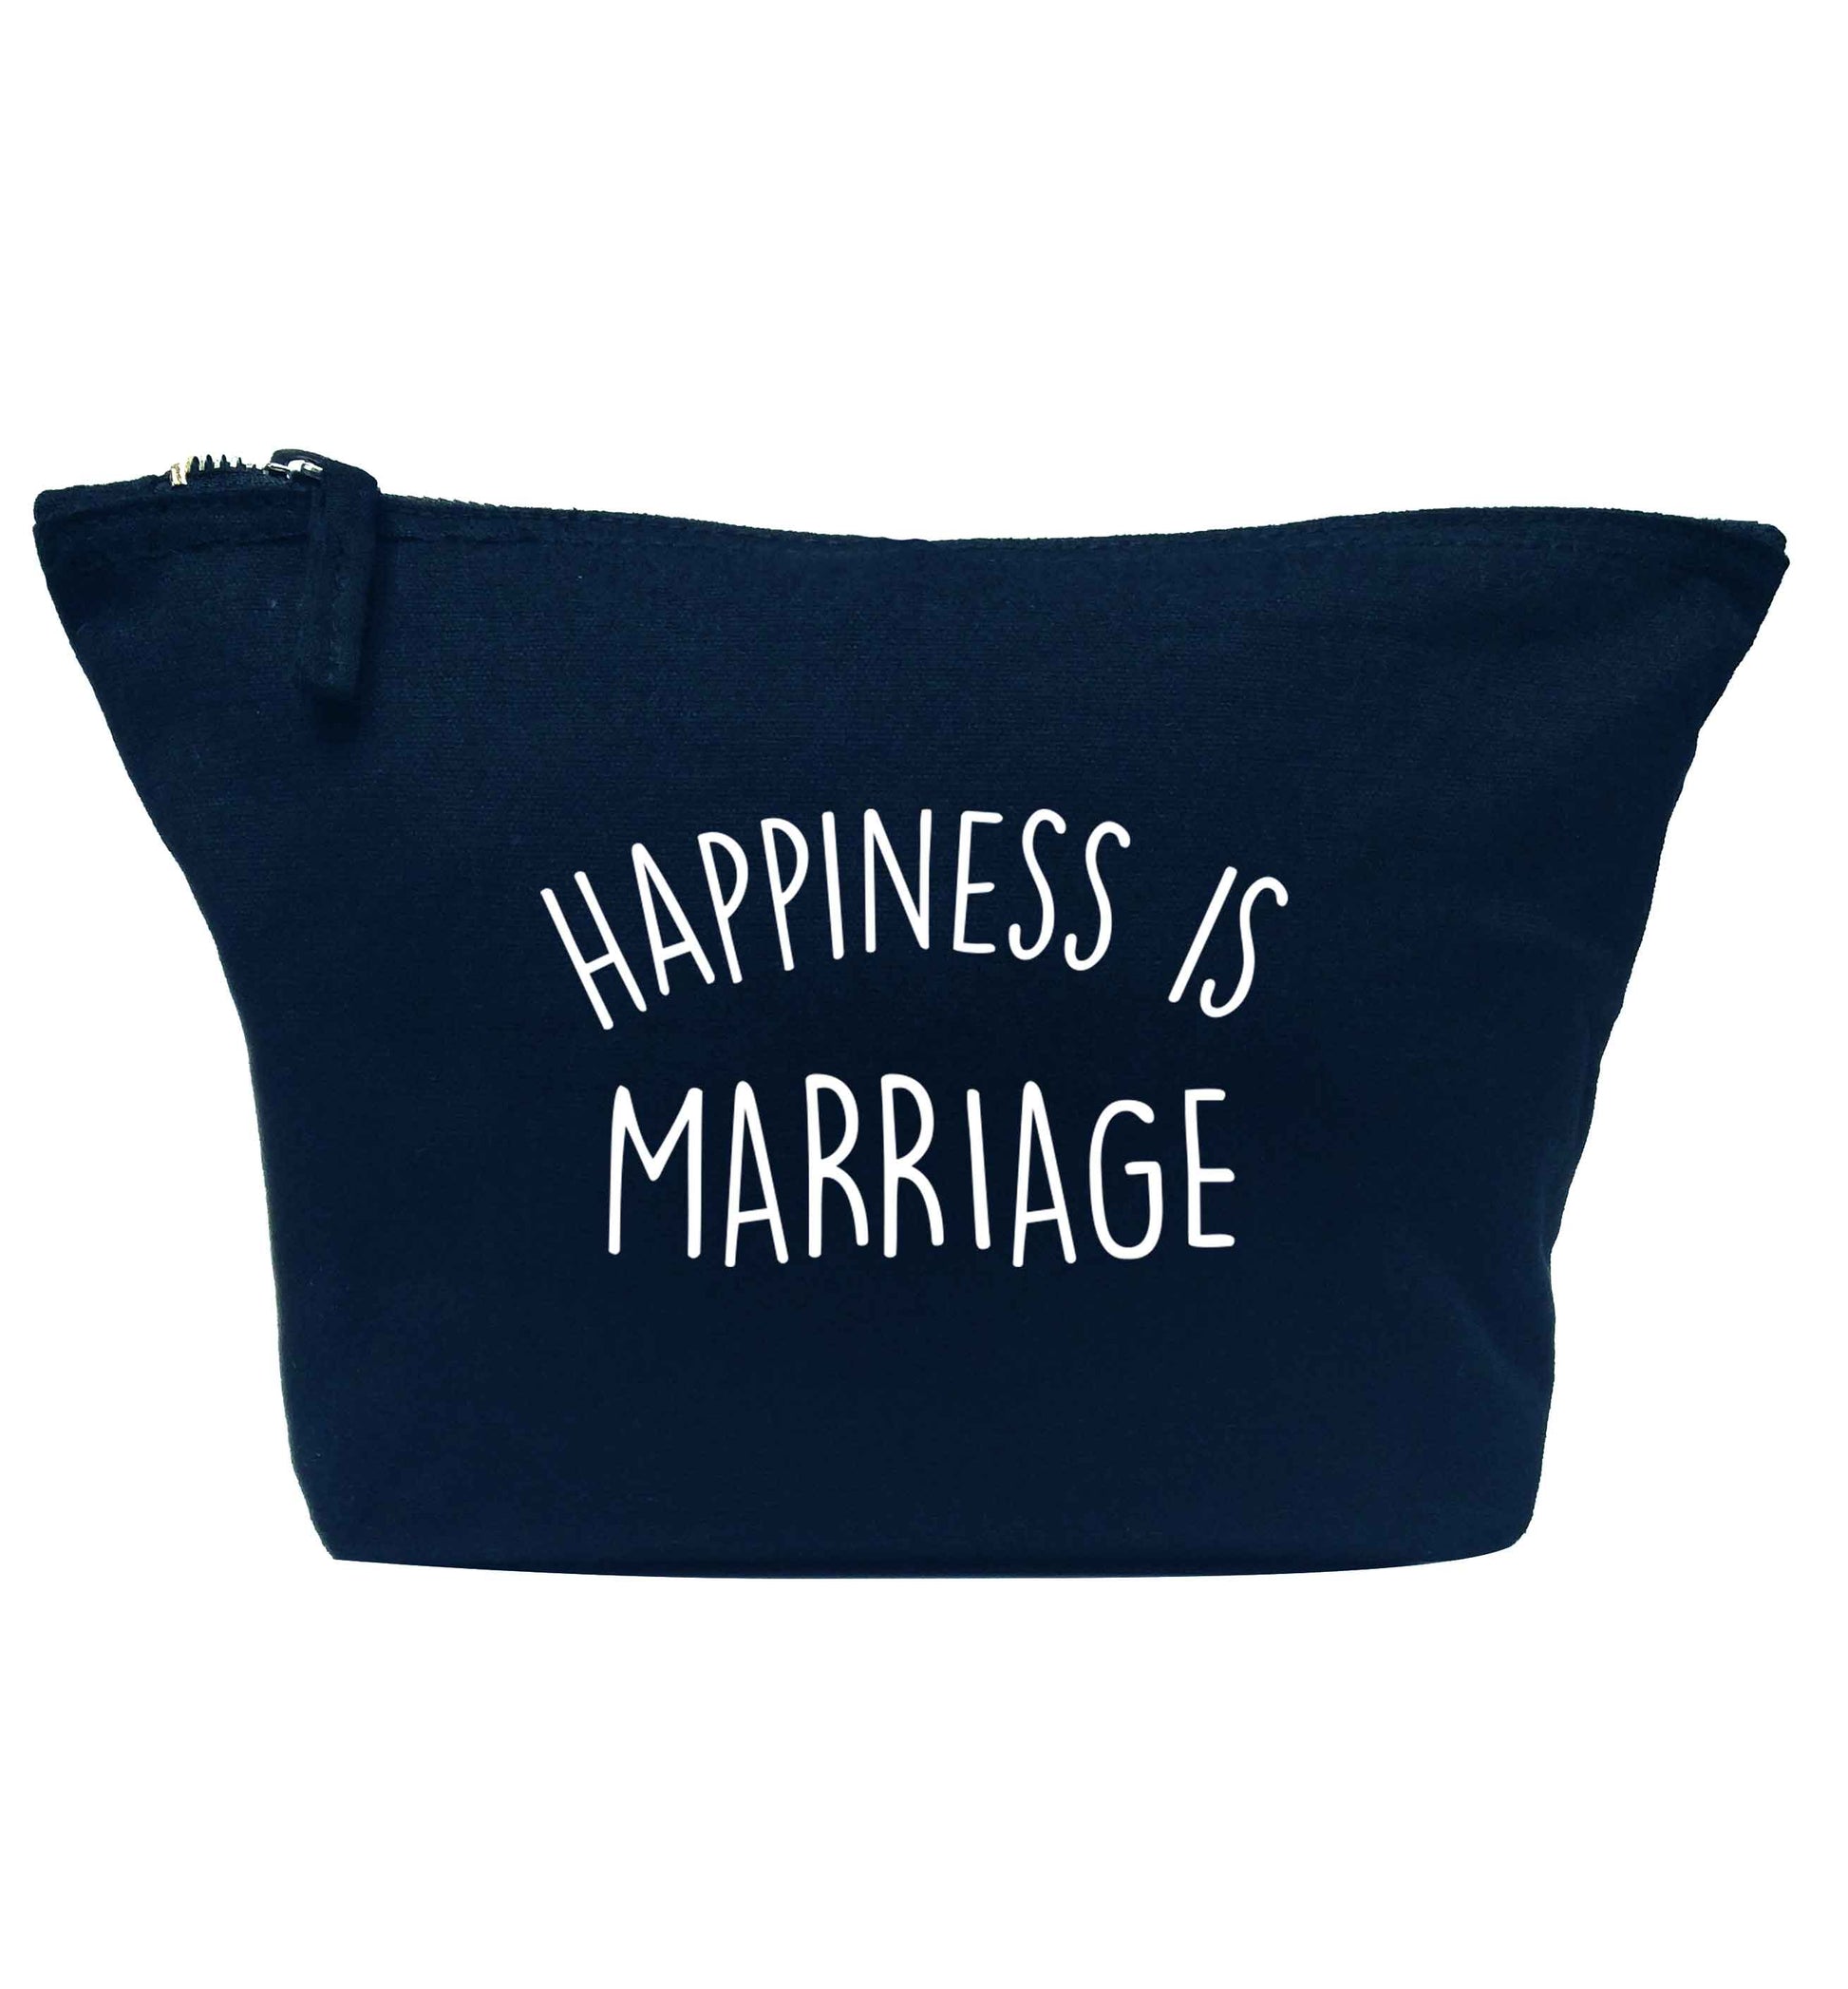 Happiness is marriage navy makeup bag